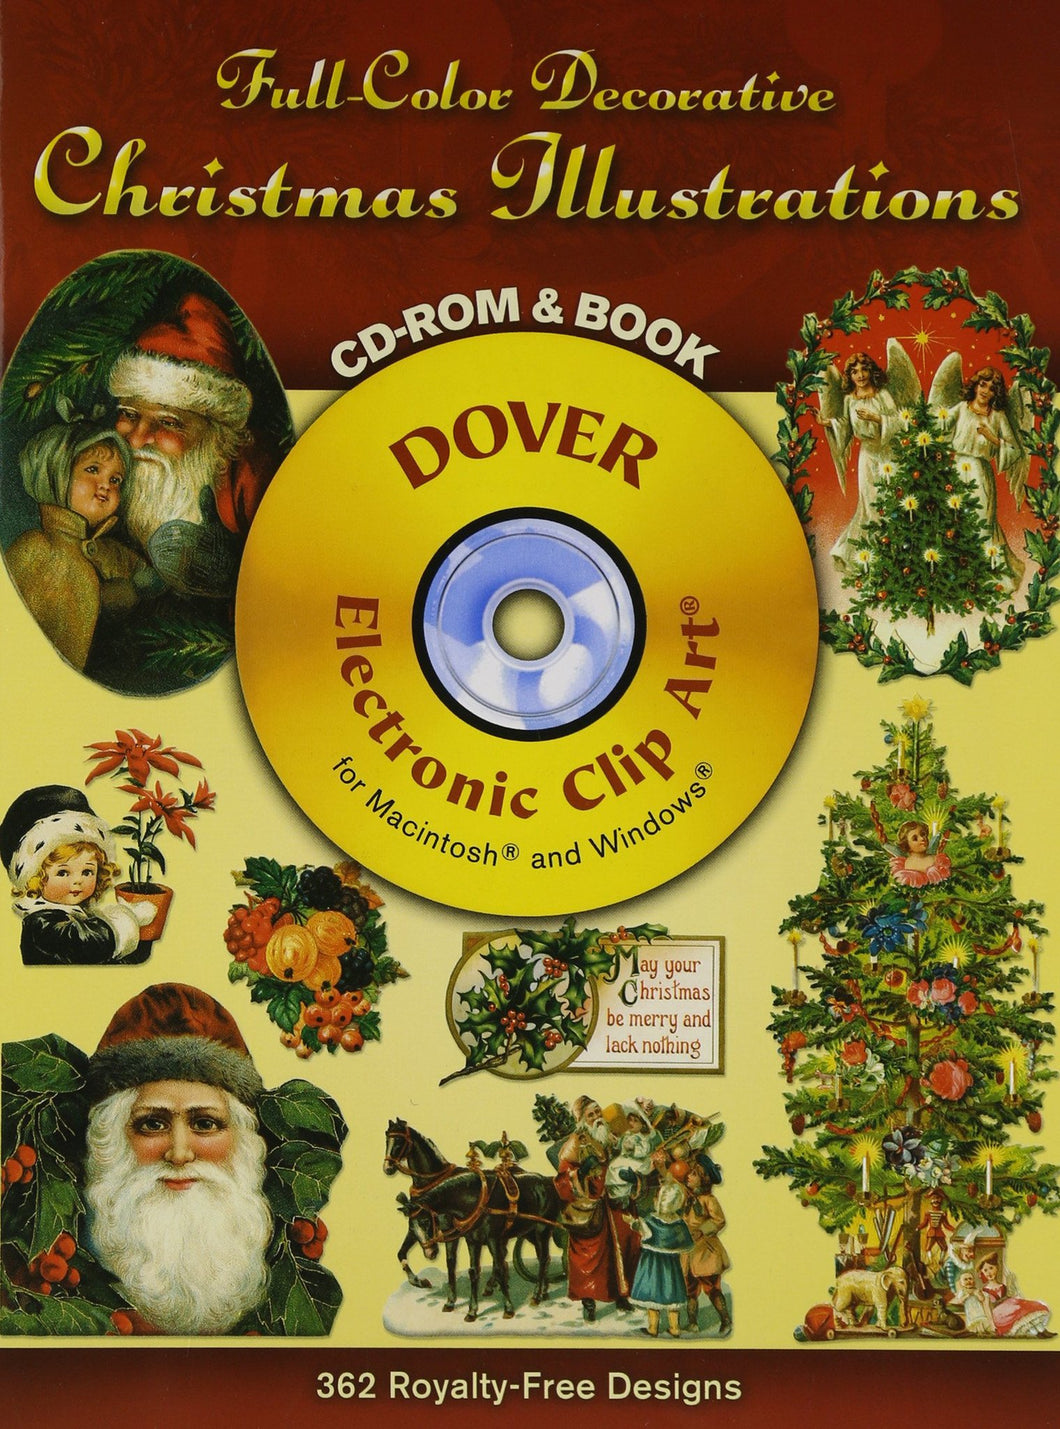 Full-Color Decorative Christmas Illustrations CD-ROM and Book (Dover Electronic Clip Art)